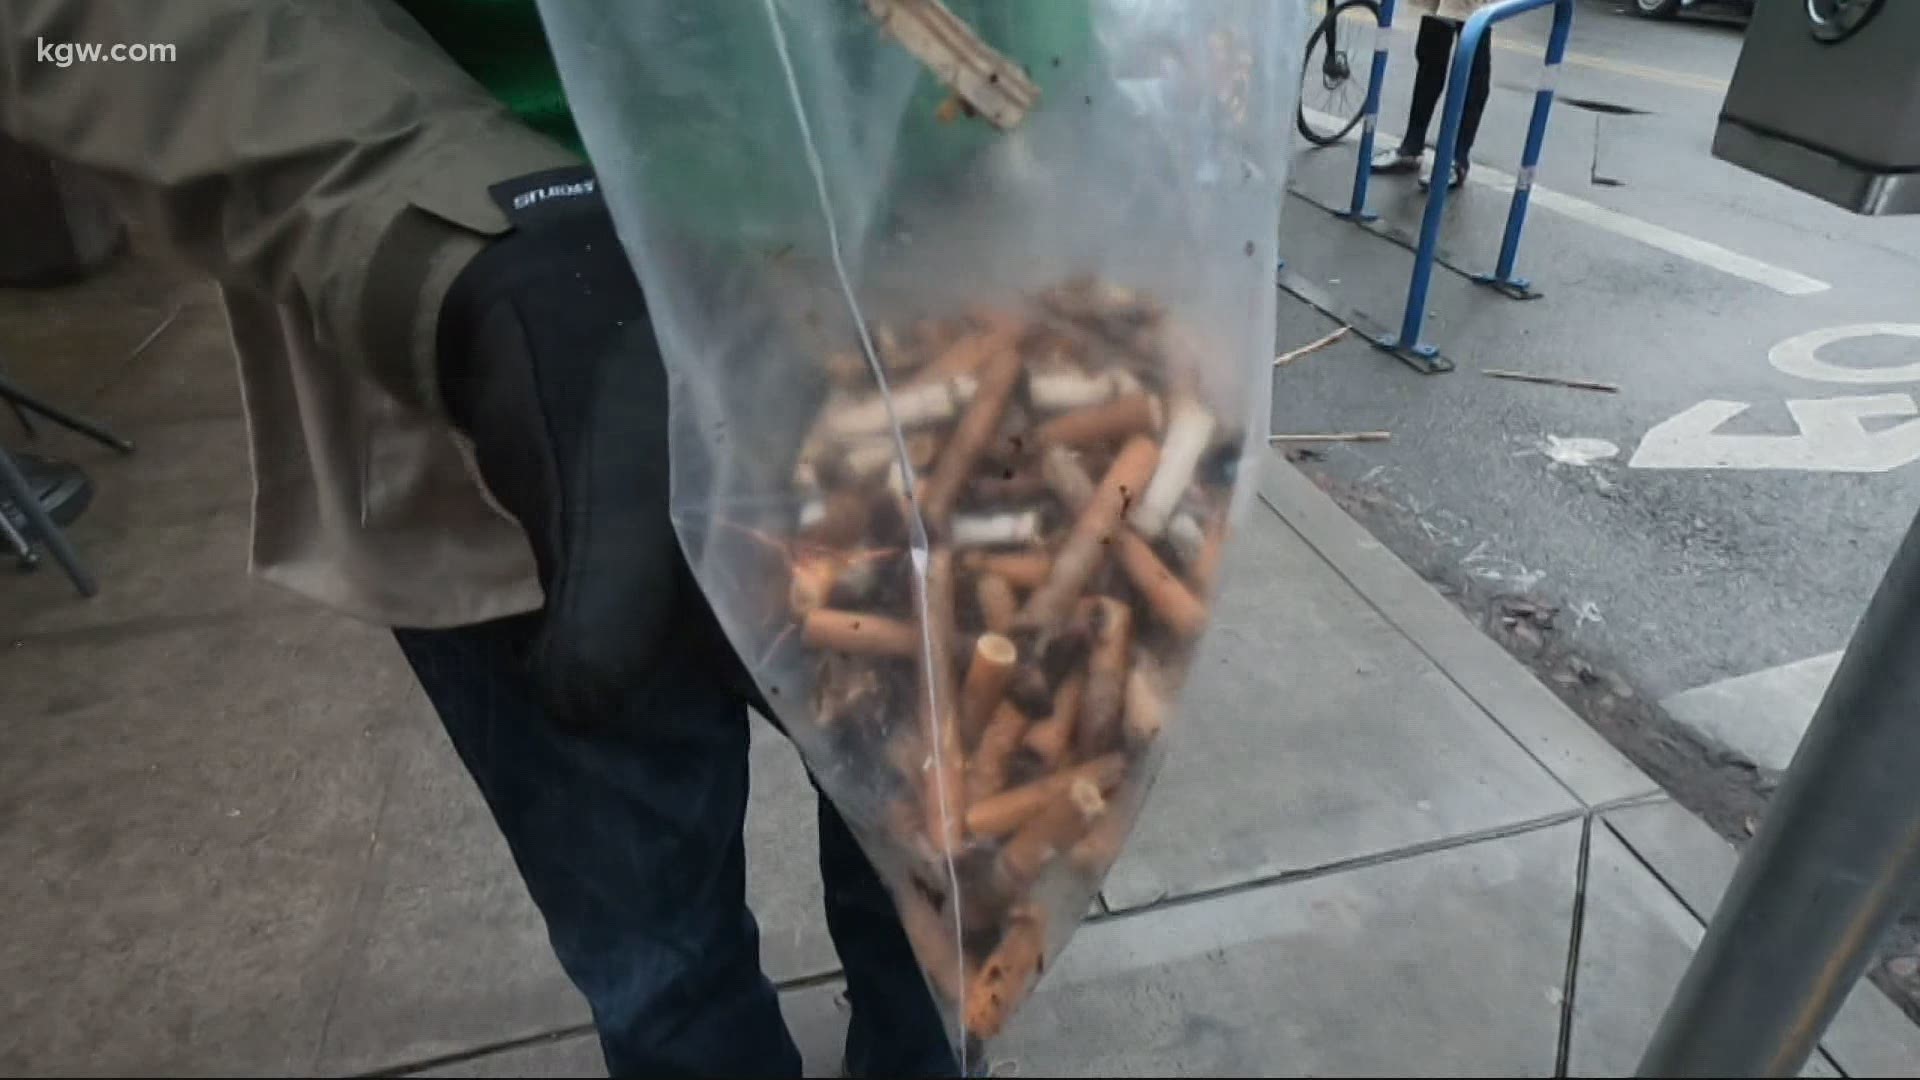 The Cigarette Waste Recycling Program, an initiative by the Pearl District Neighborhood Association, ships butts to a New Jersey plant for recycling.